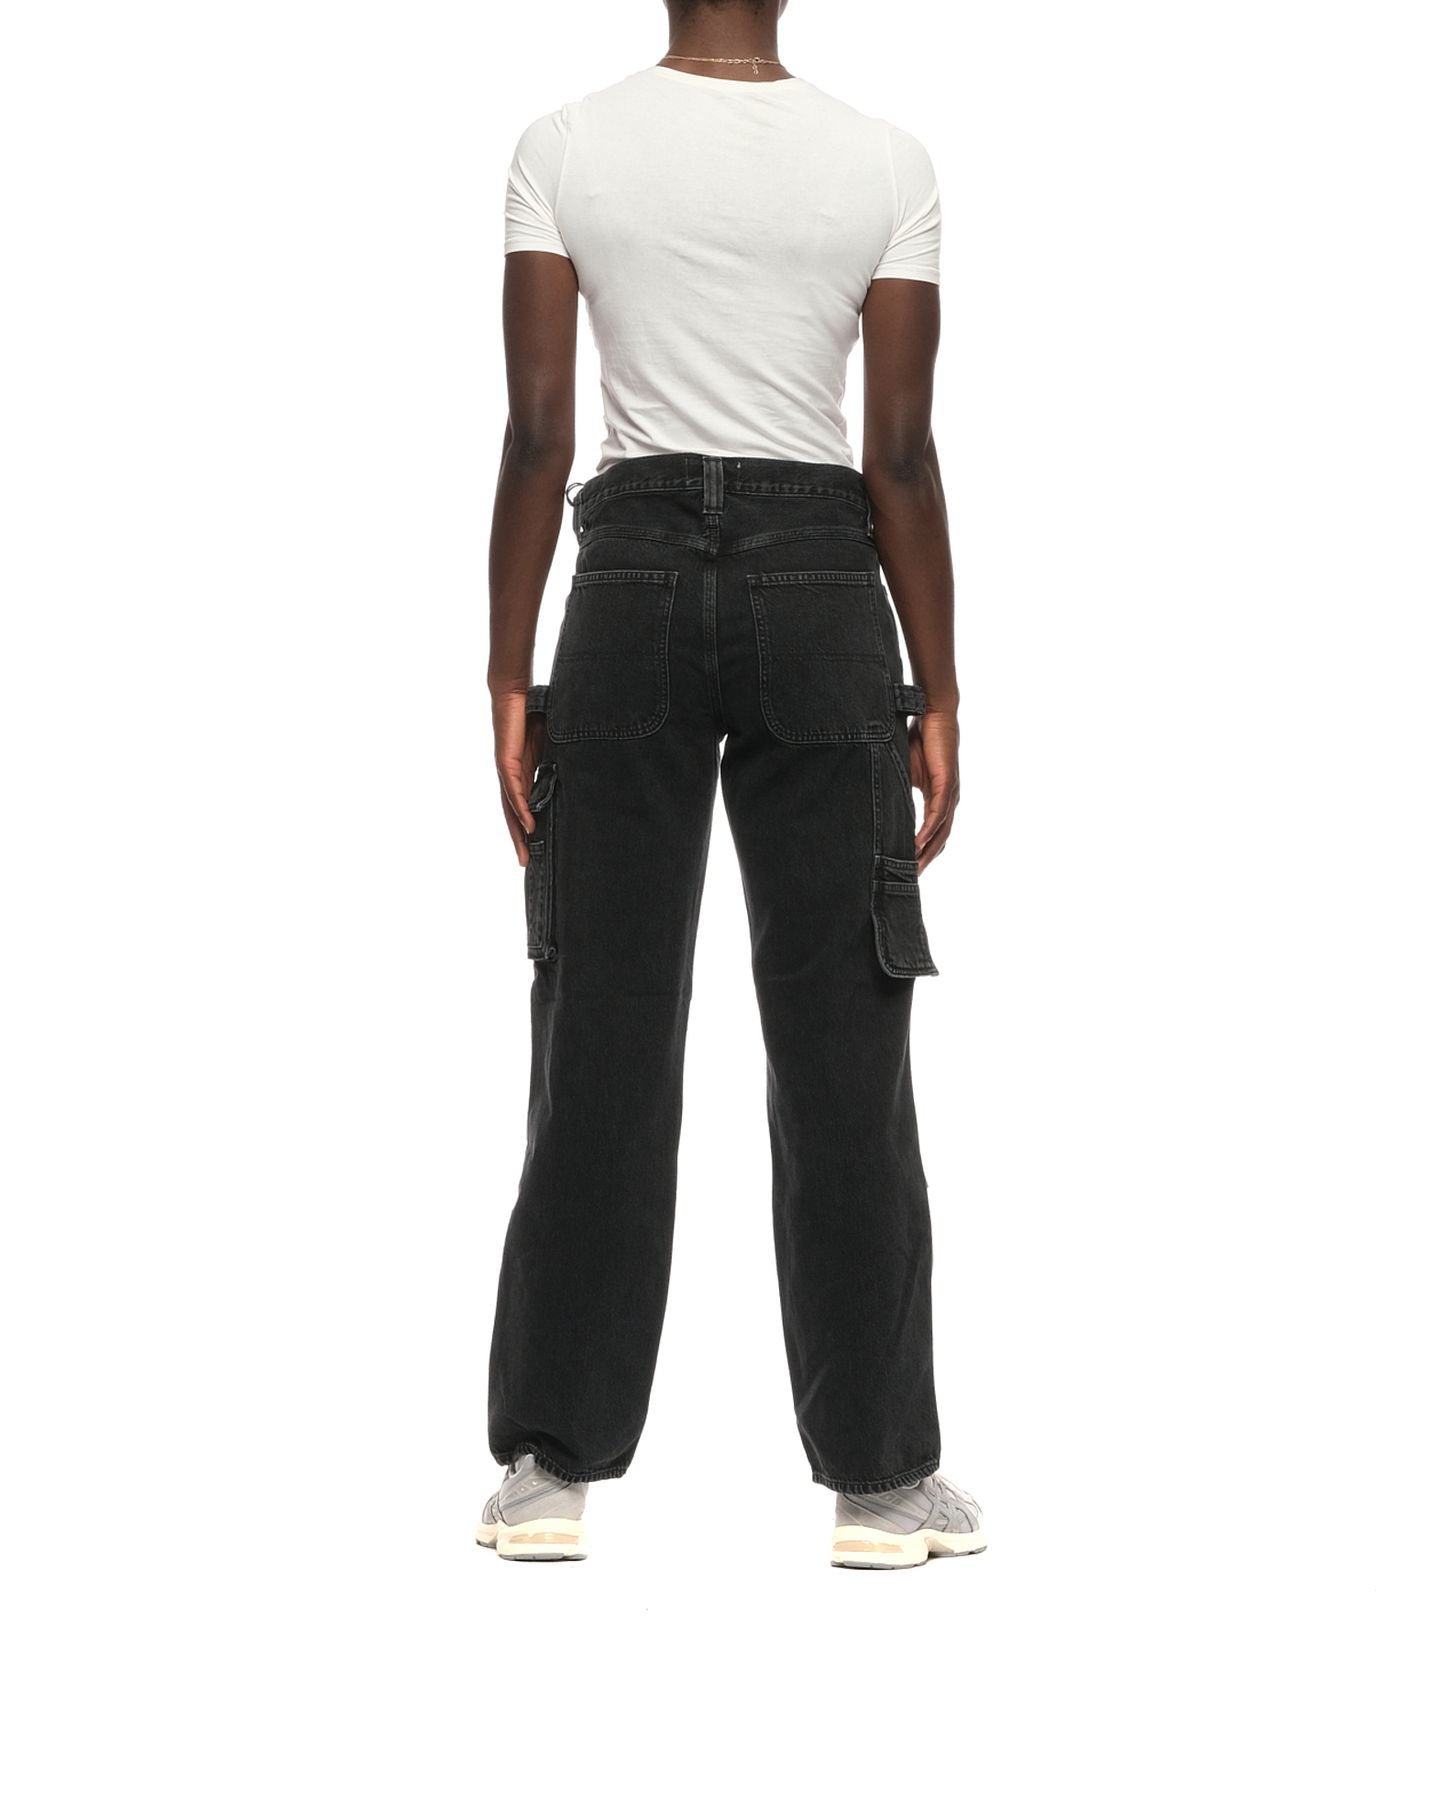 Jeans woman A9165 1557 SPIDER Agolde